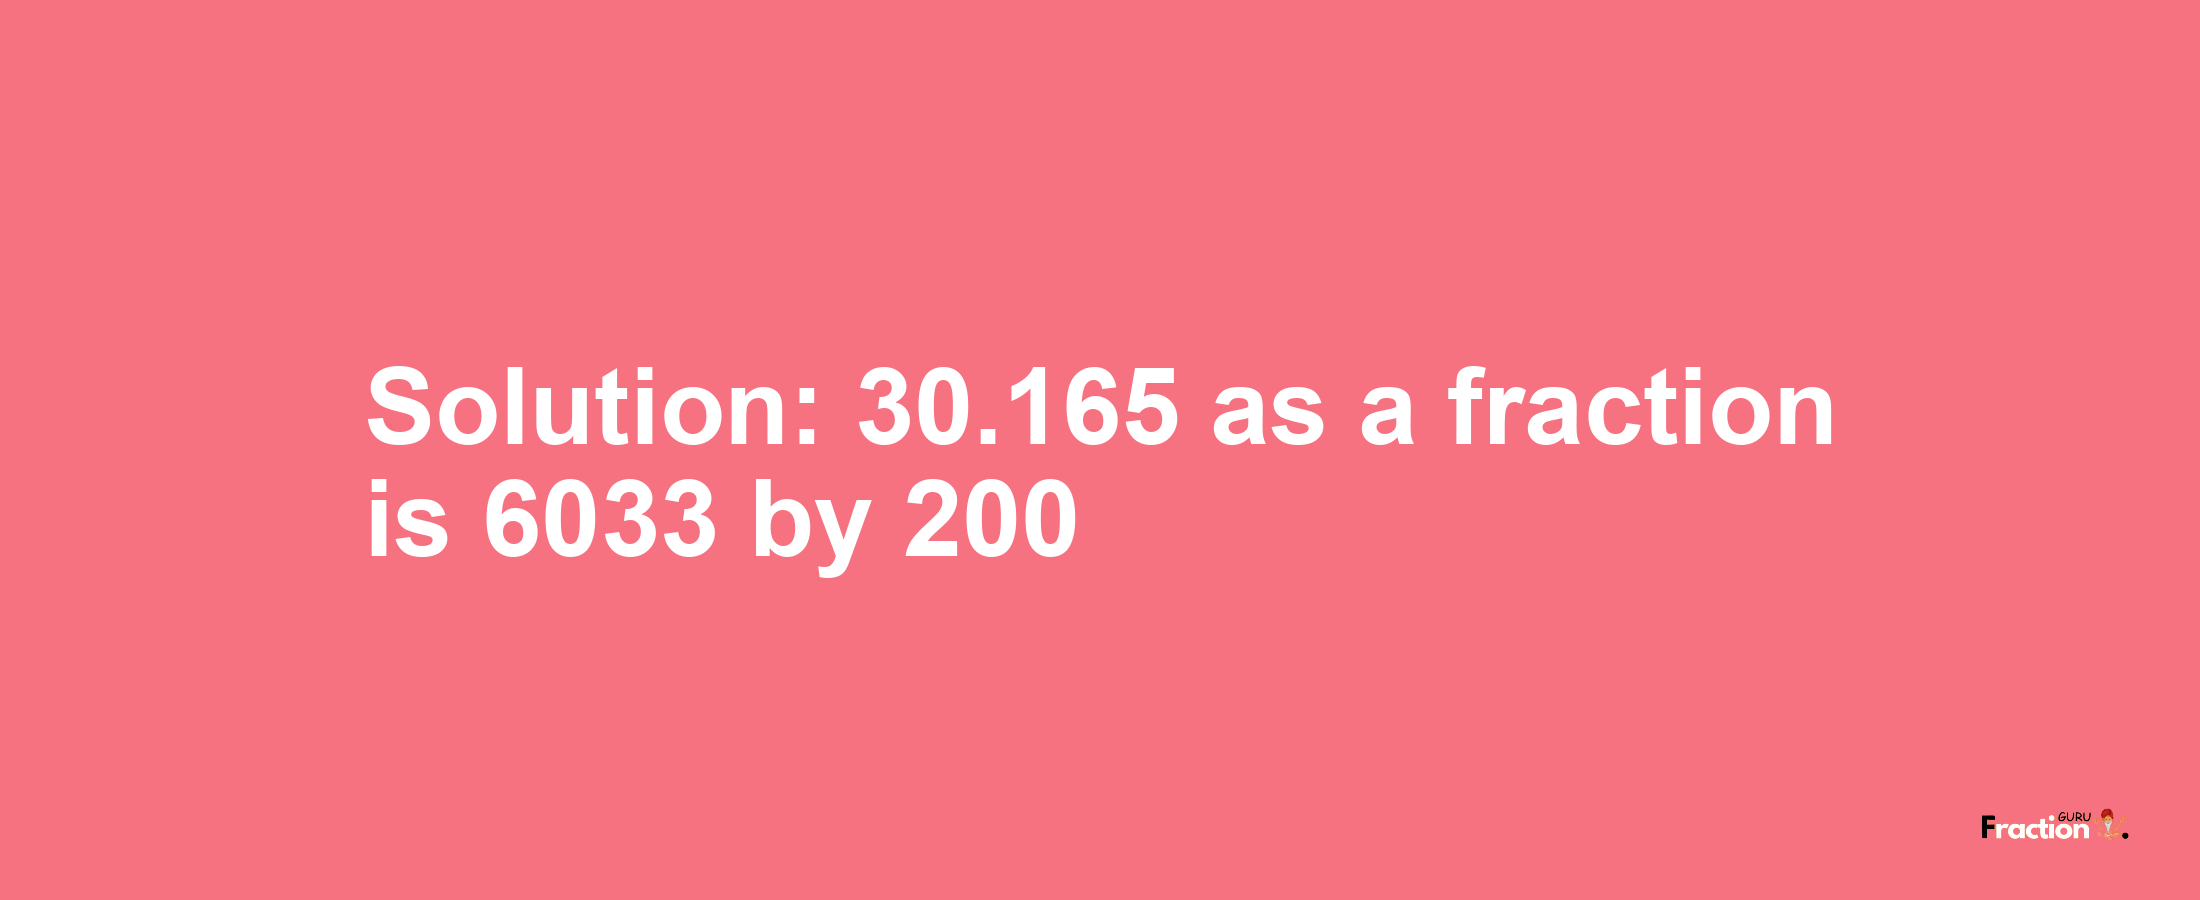 Solution:30.165 as a fraction is 6033/200